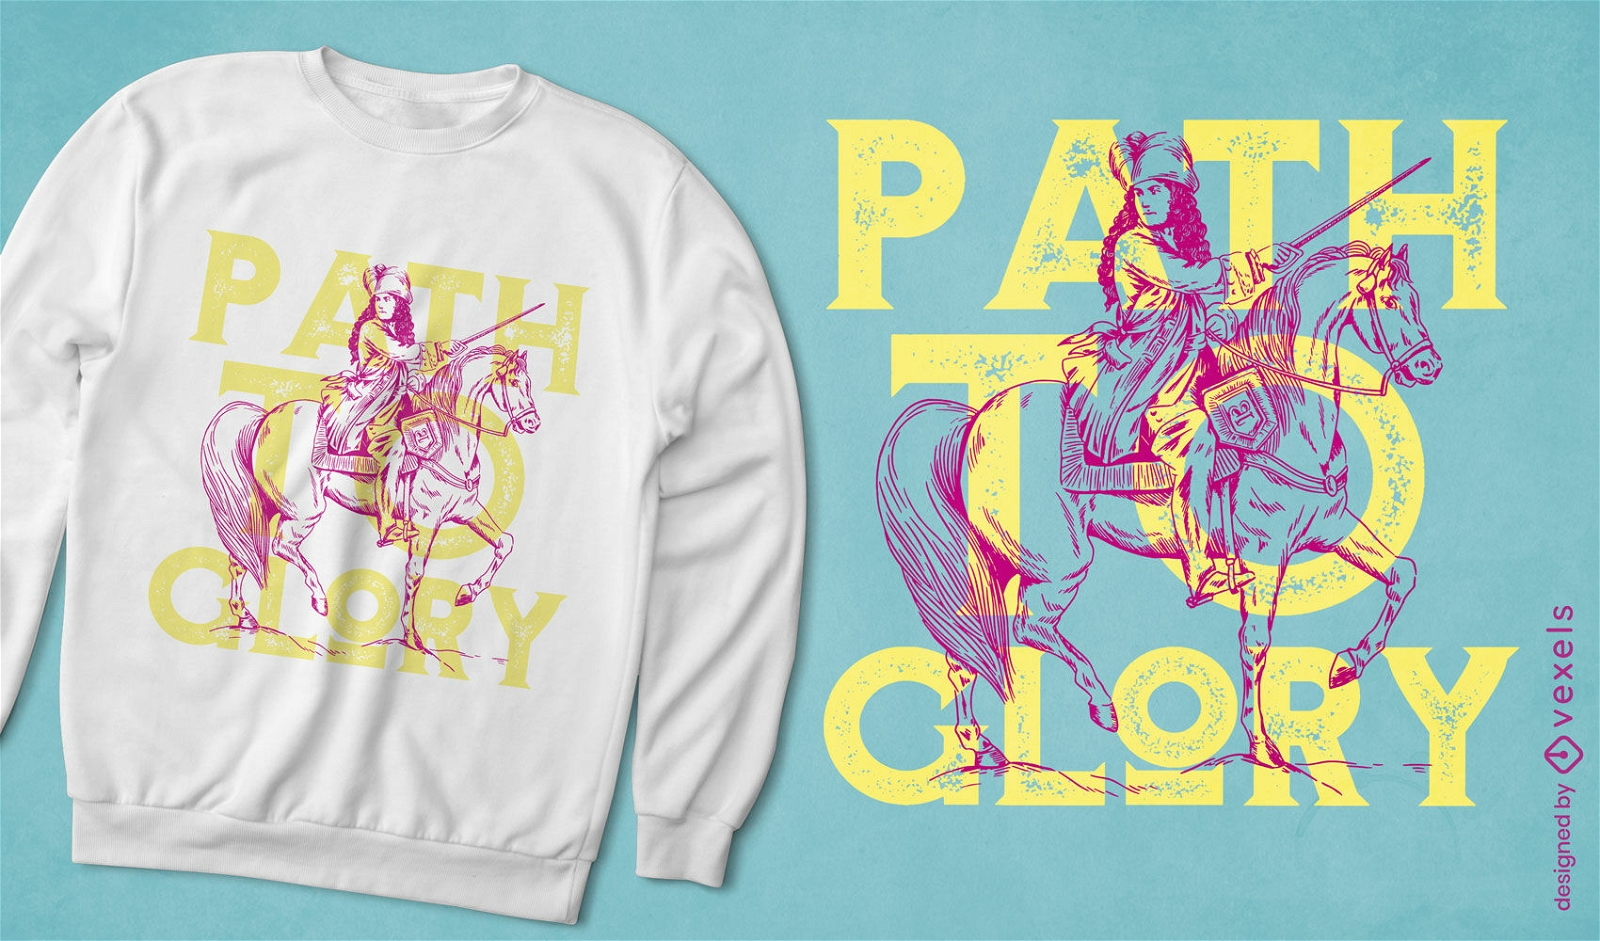 Path to glory knight quote t-shirt design